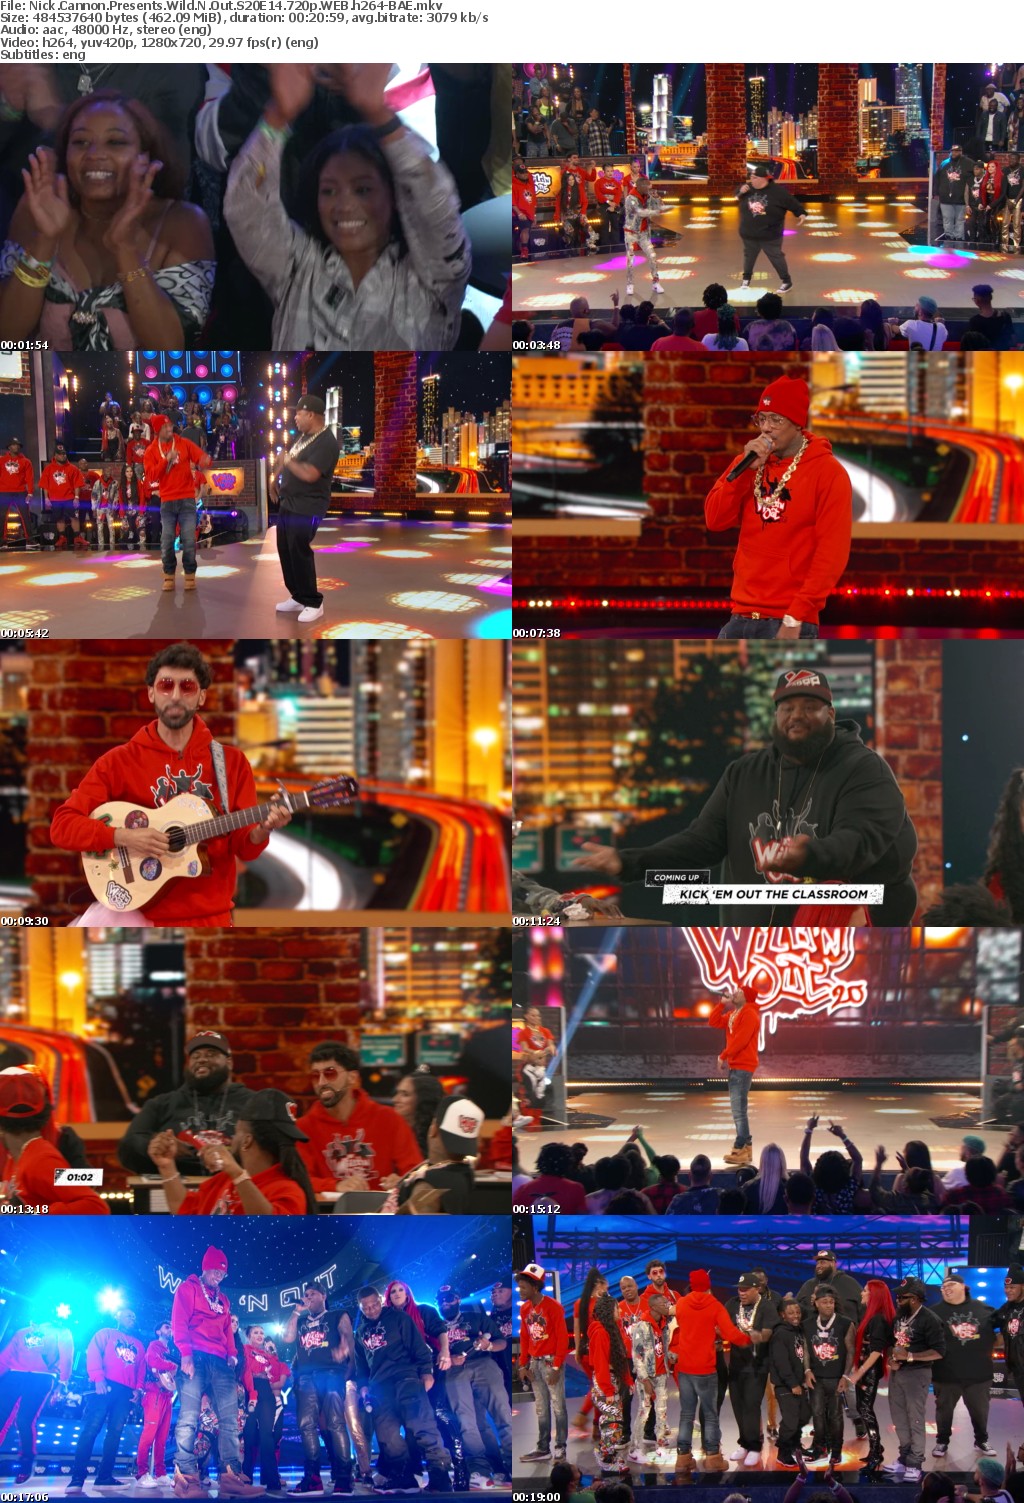 Nick Cannon Presents Wild N Out S20E14 720p WEB h264-BAE